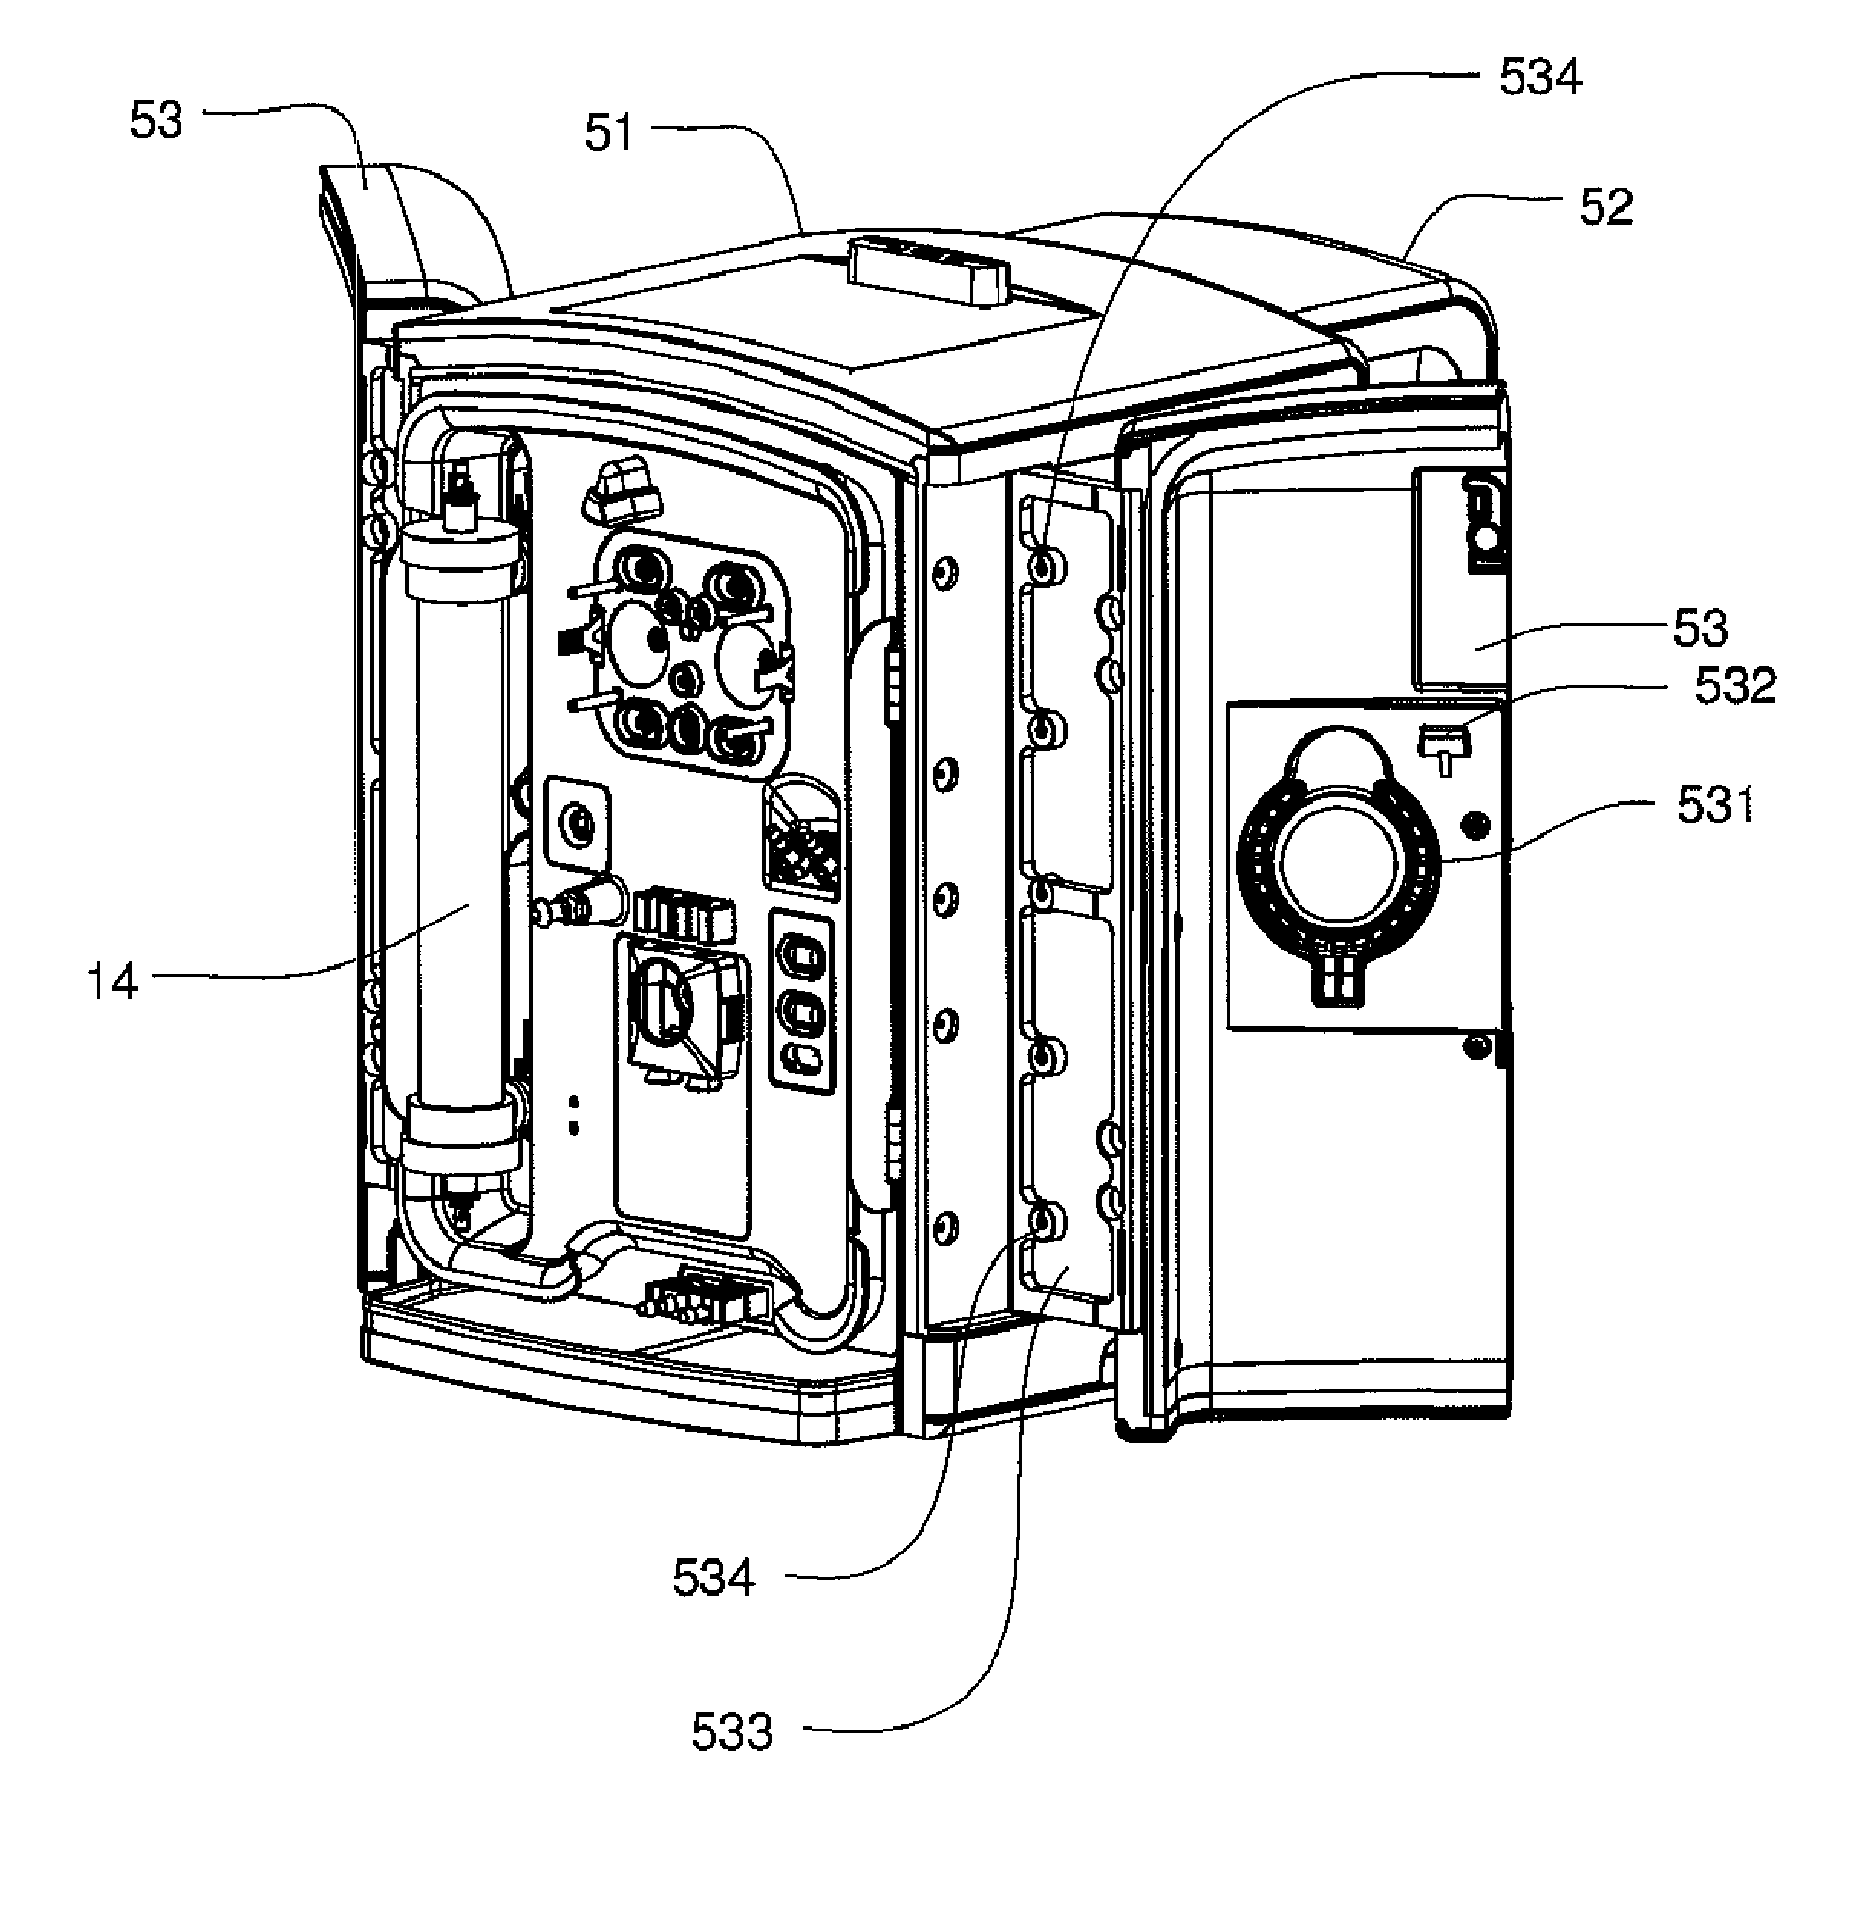 Enclosure for a portable hemodialysis system